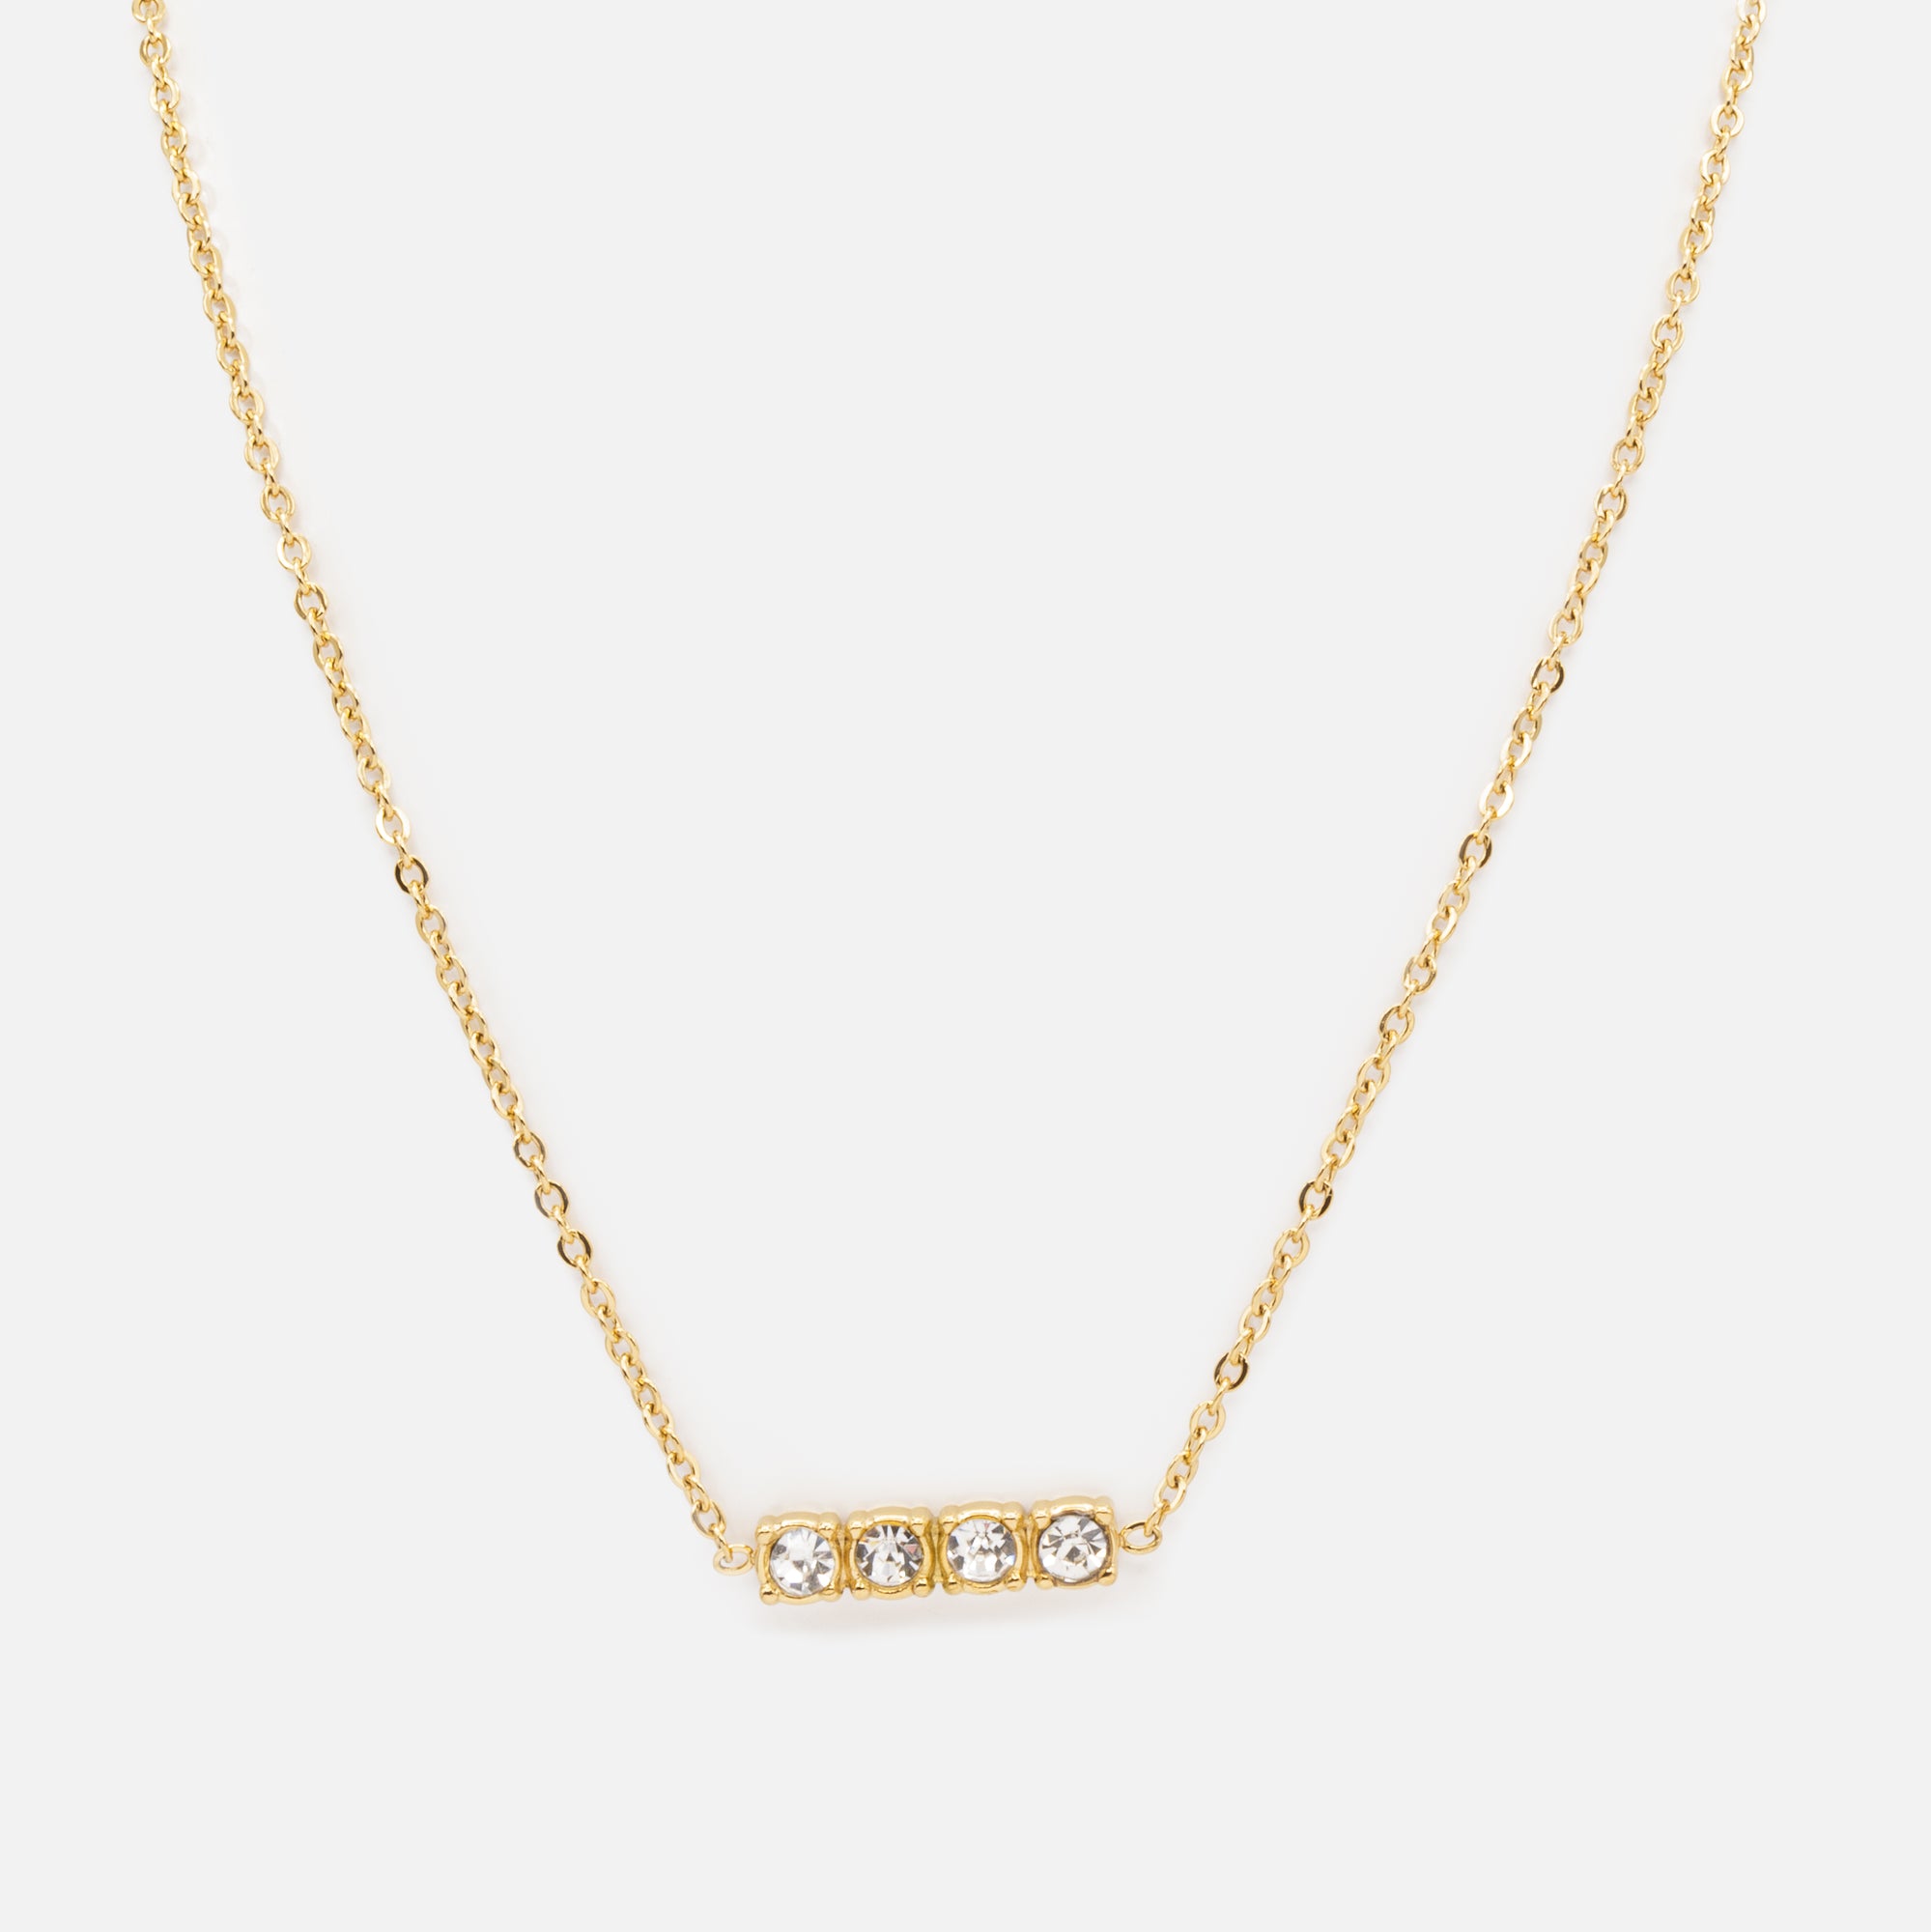 Gold Necklace and Bracelet Set with Stainless Steel Cubic Zirconia Quartet